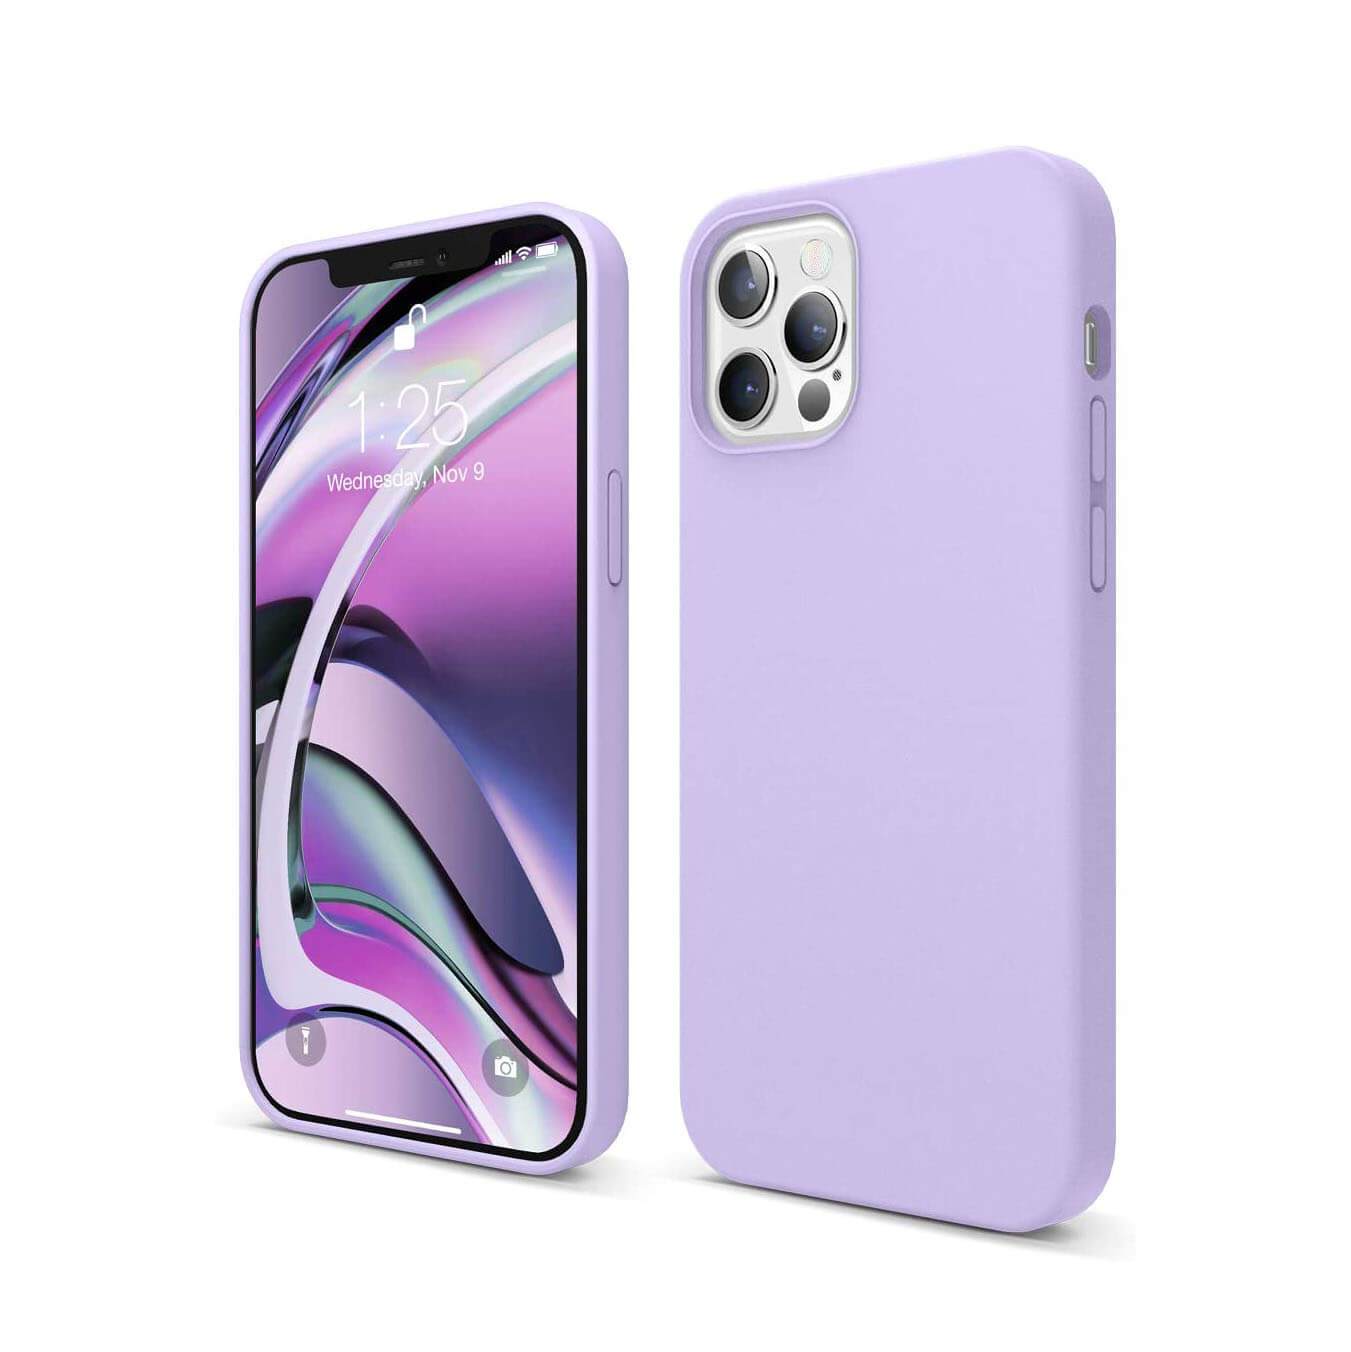 Liquid Silicone Case For Apple iPhone 12 Pro Max Luxury Thin Phone Cover Lilac Purple